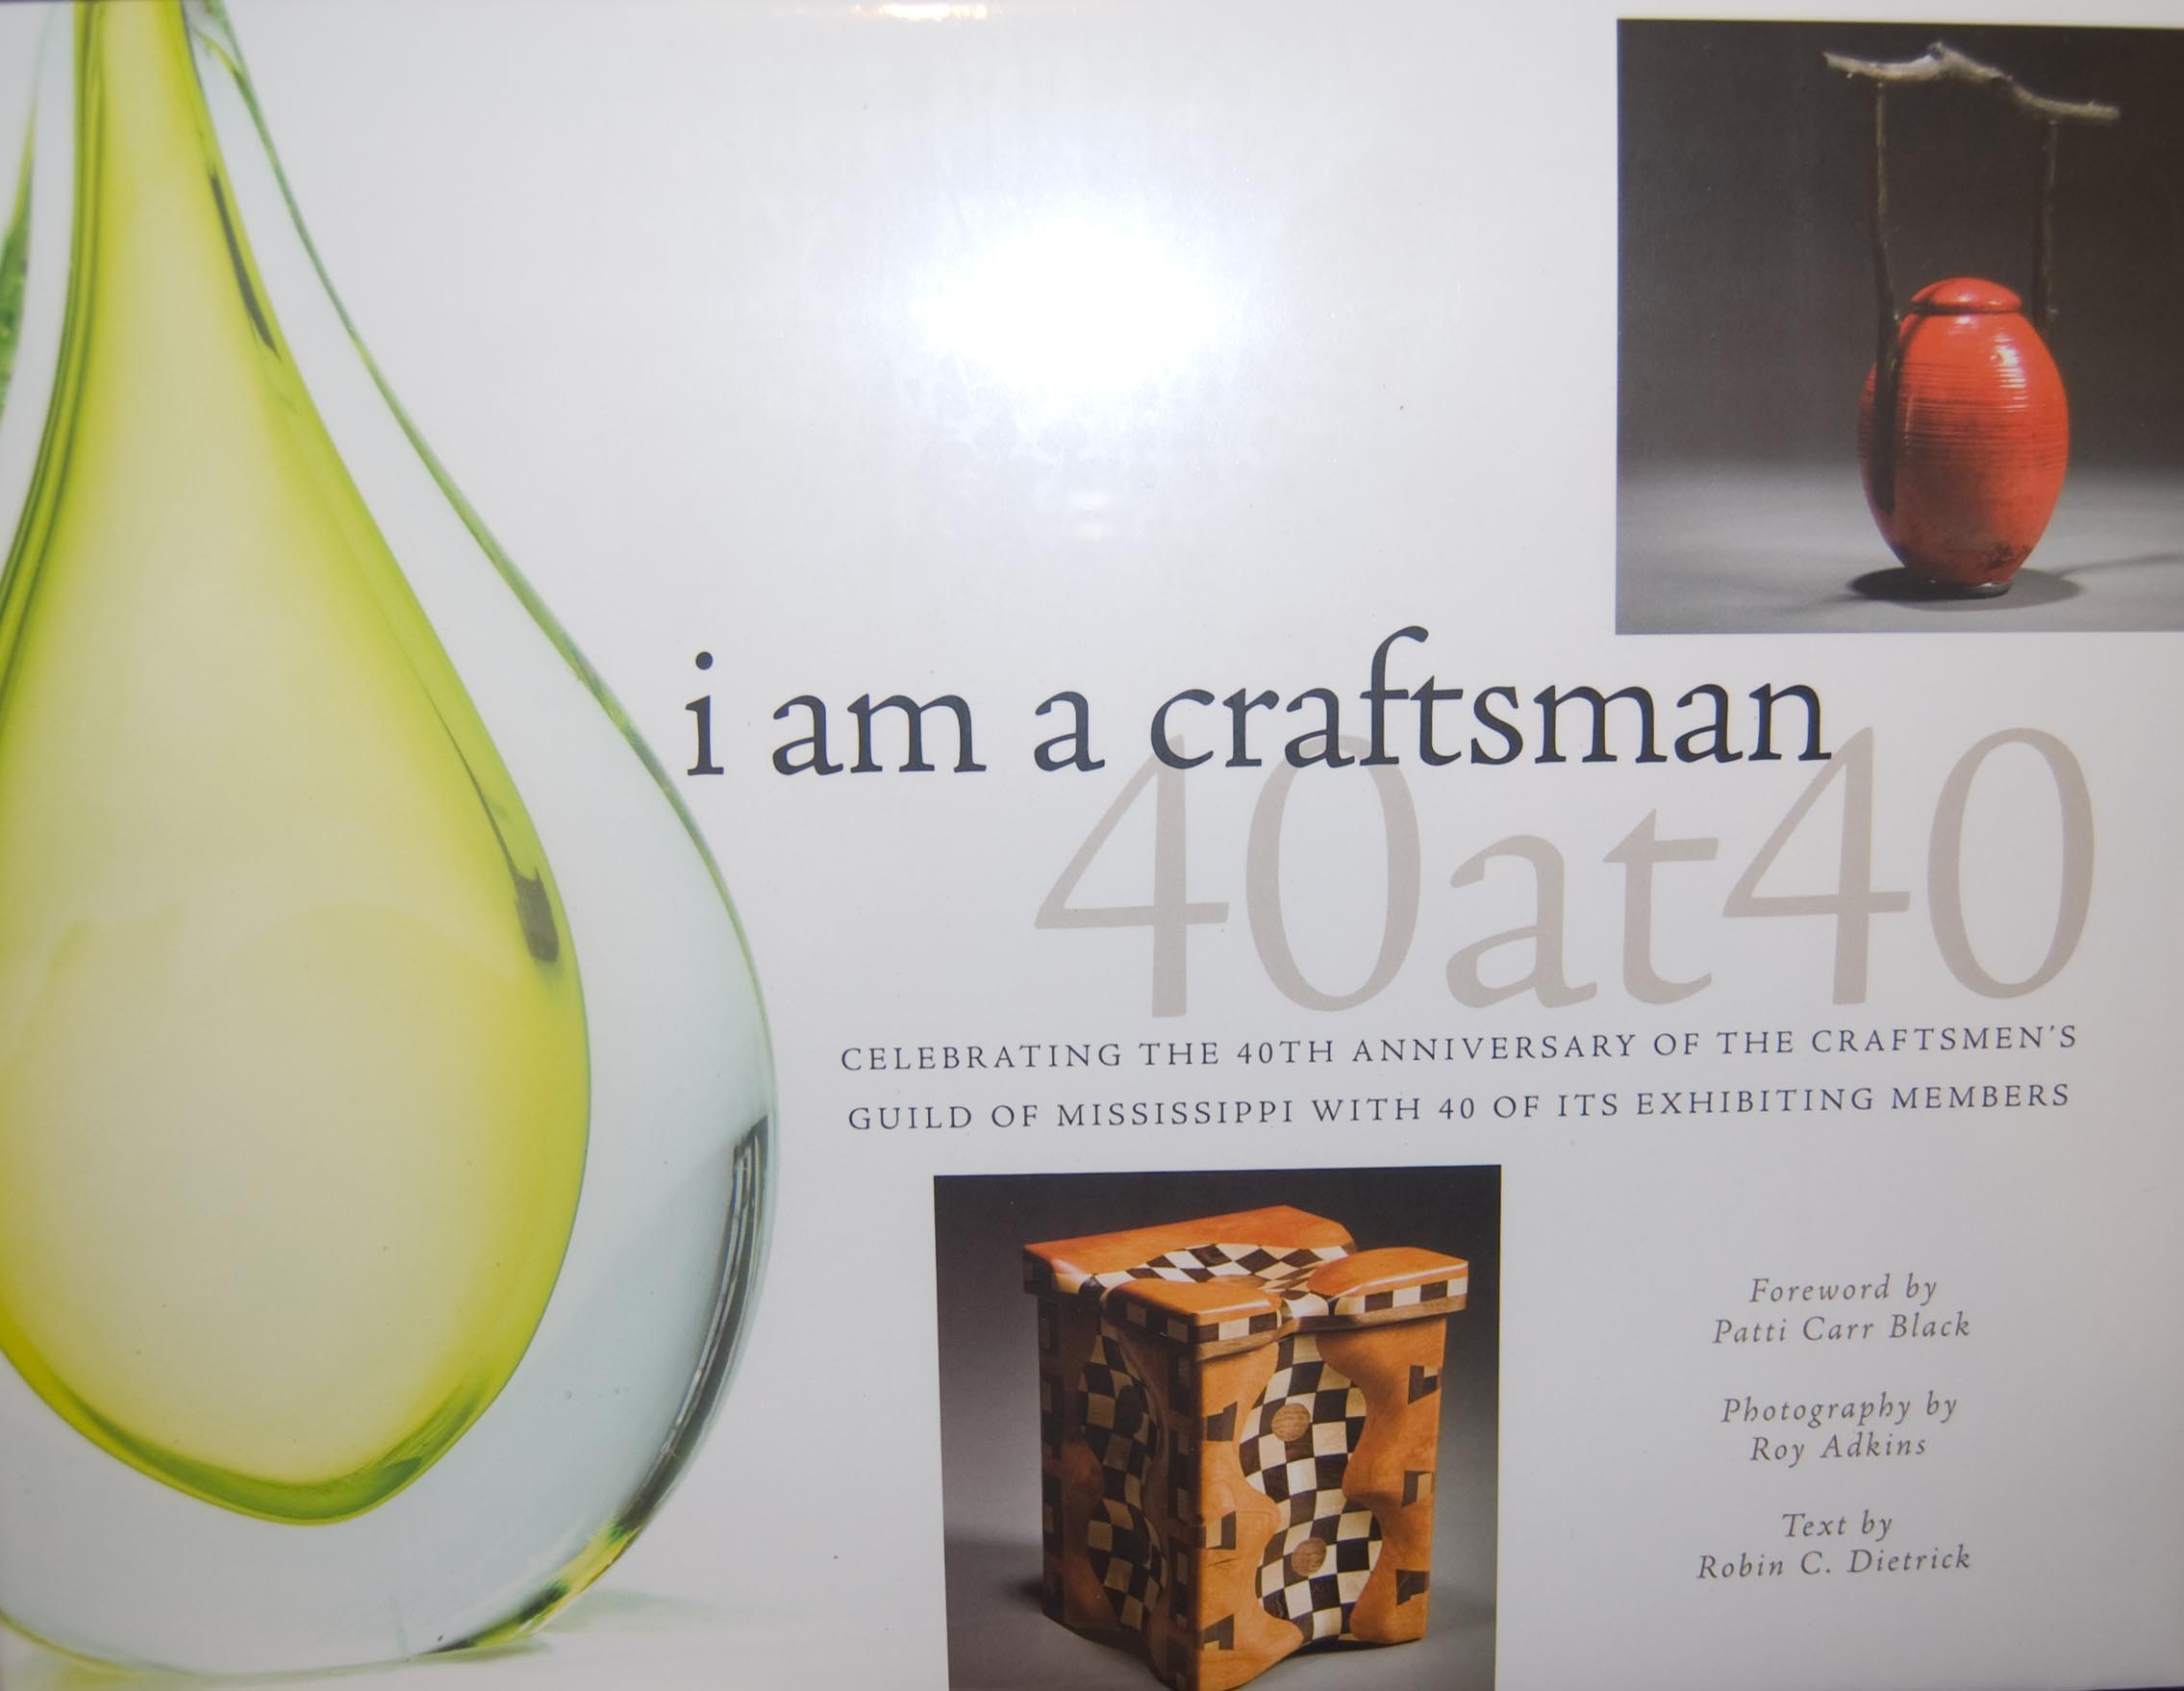 i am a craftsman - 40 at 40 book, celebrating 40 years of the craftsmen's guild of mississippi with 40 exceptional mississippi craftsmen